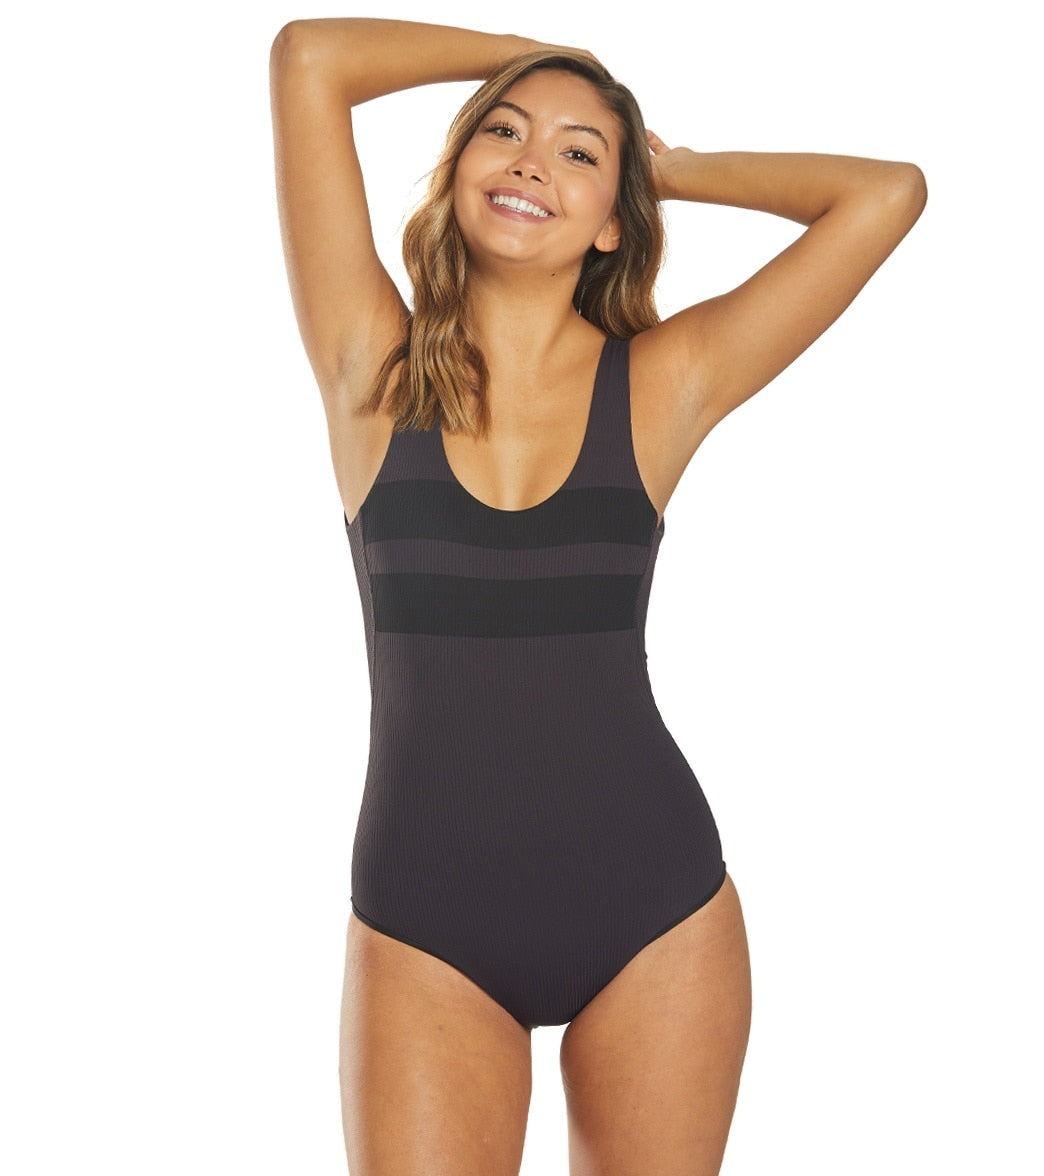 Hurley Women's Quick Dry Block Party Bodysuit - Oil Grey Small Polyester/Spandex - Swimoutlet.com